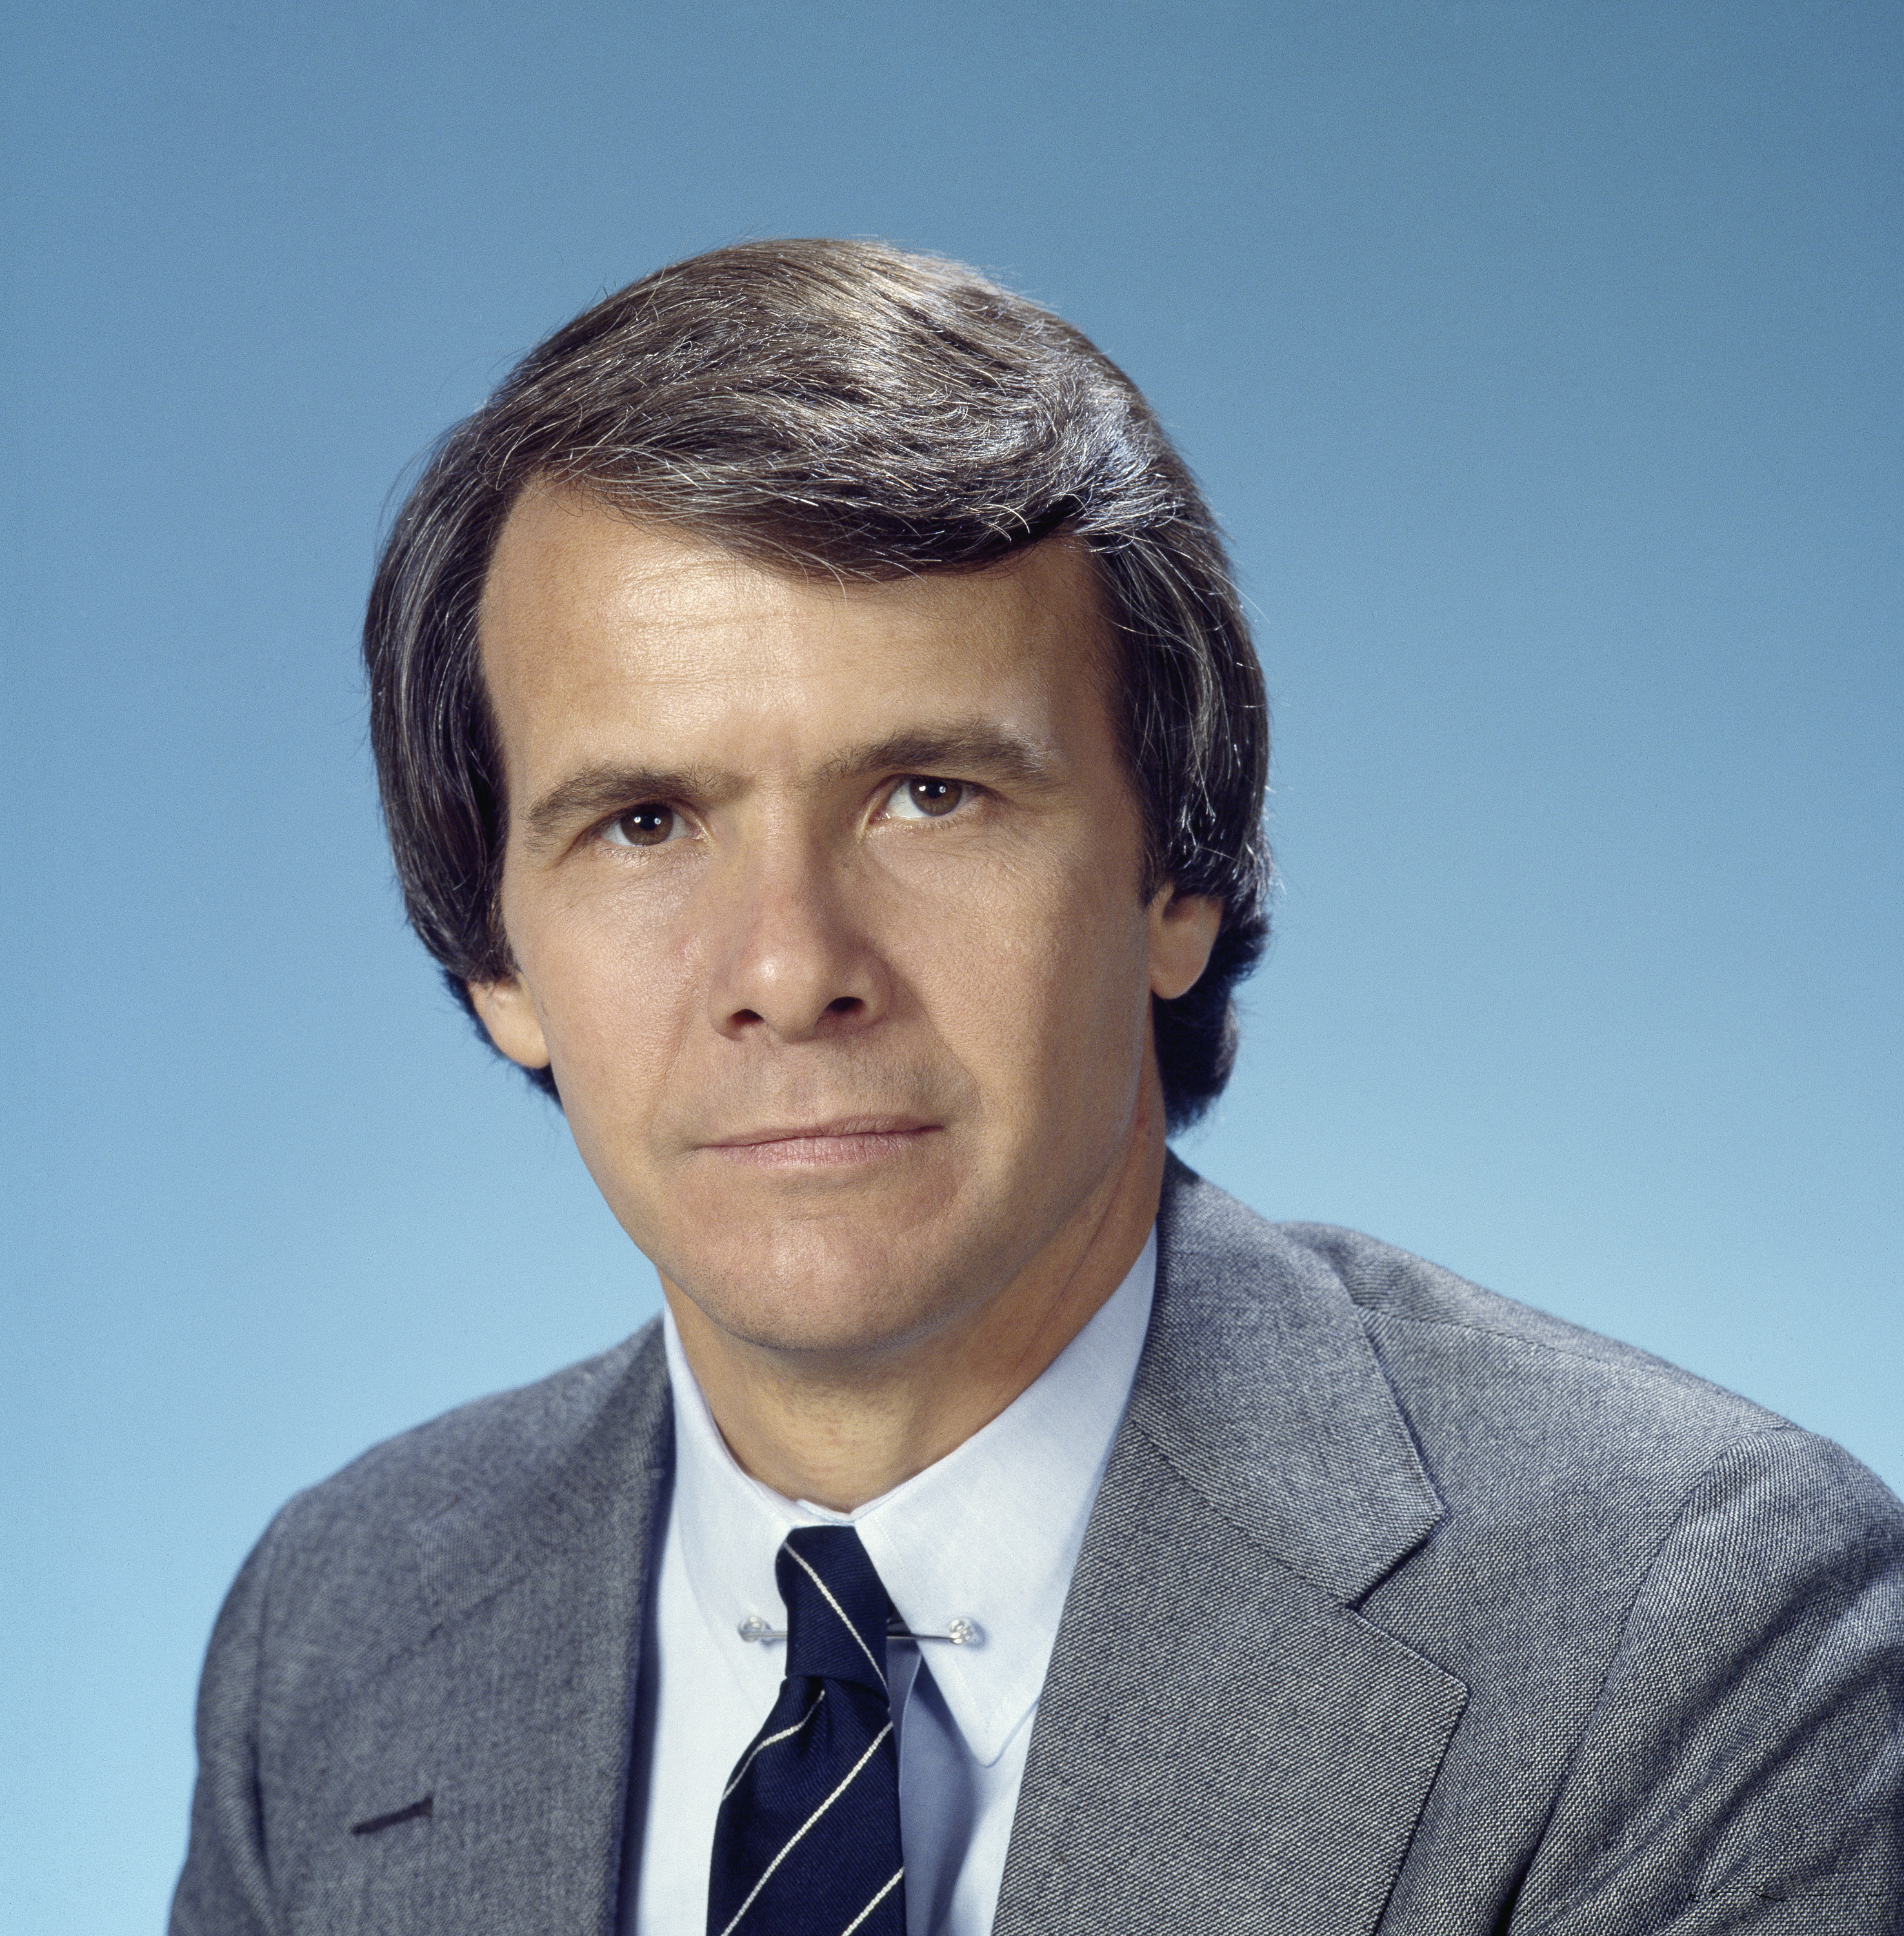 Tom Brokaw on the "Today" show in an undated photo | Source: Getty Images